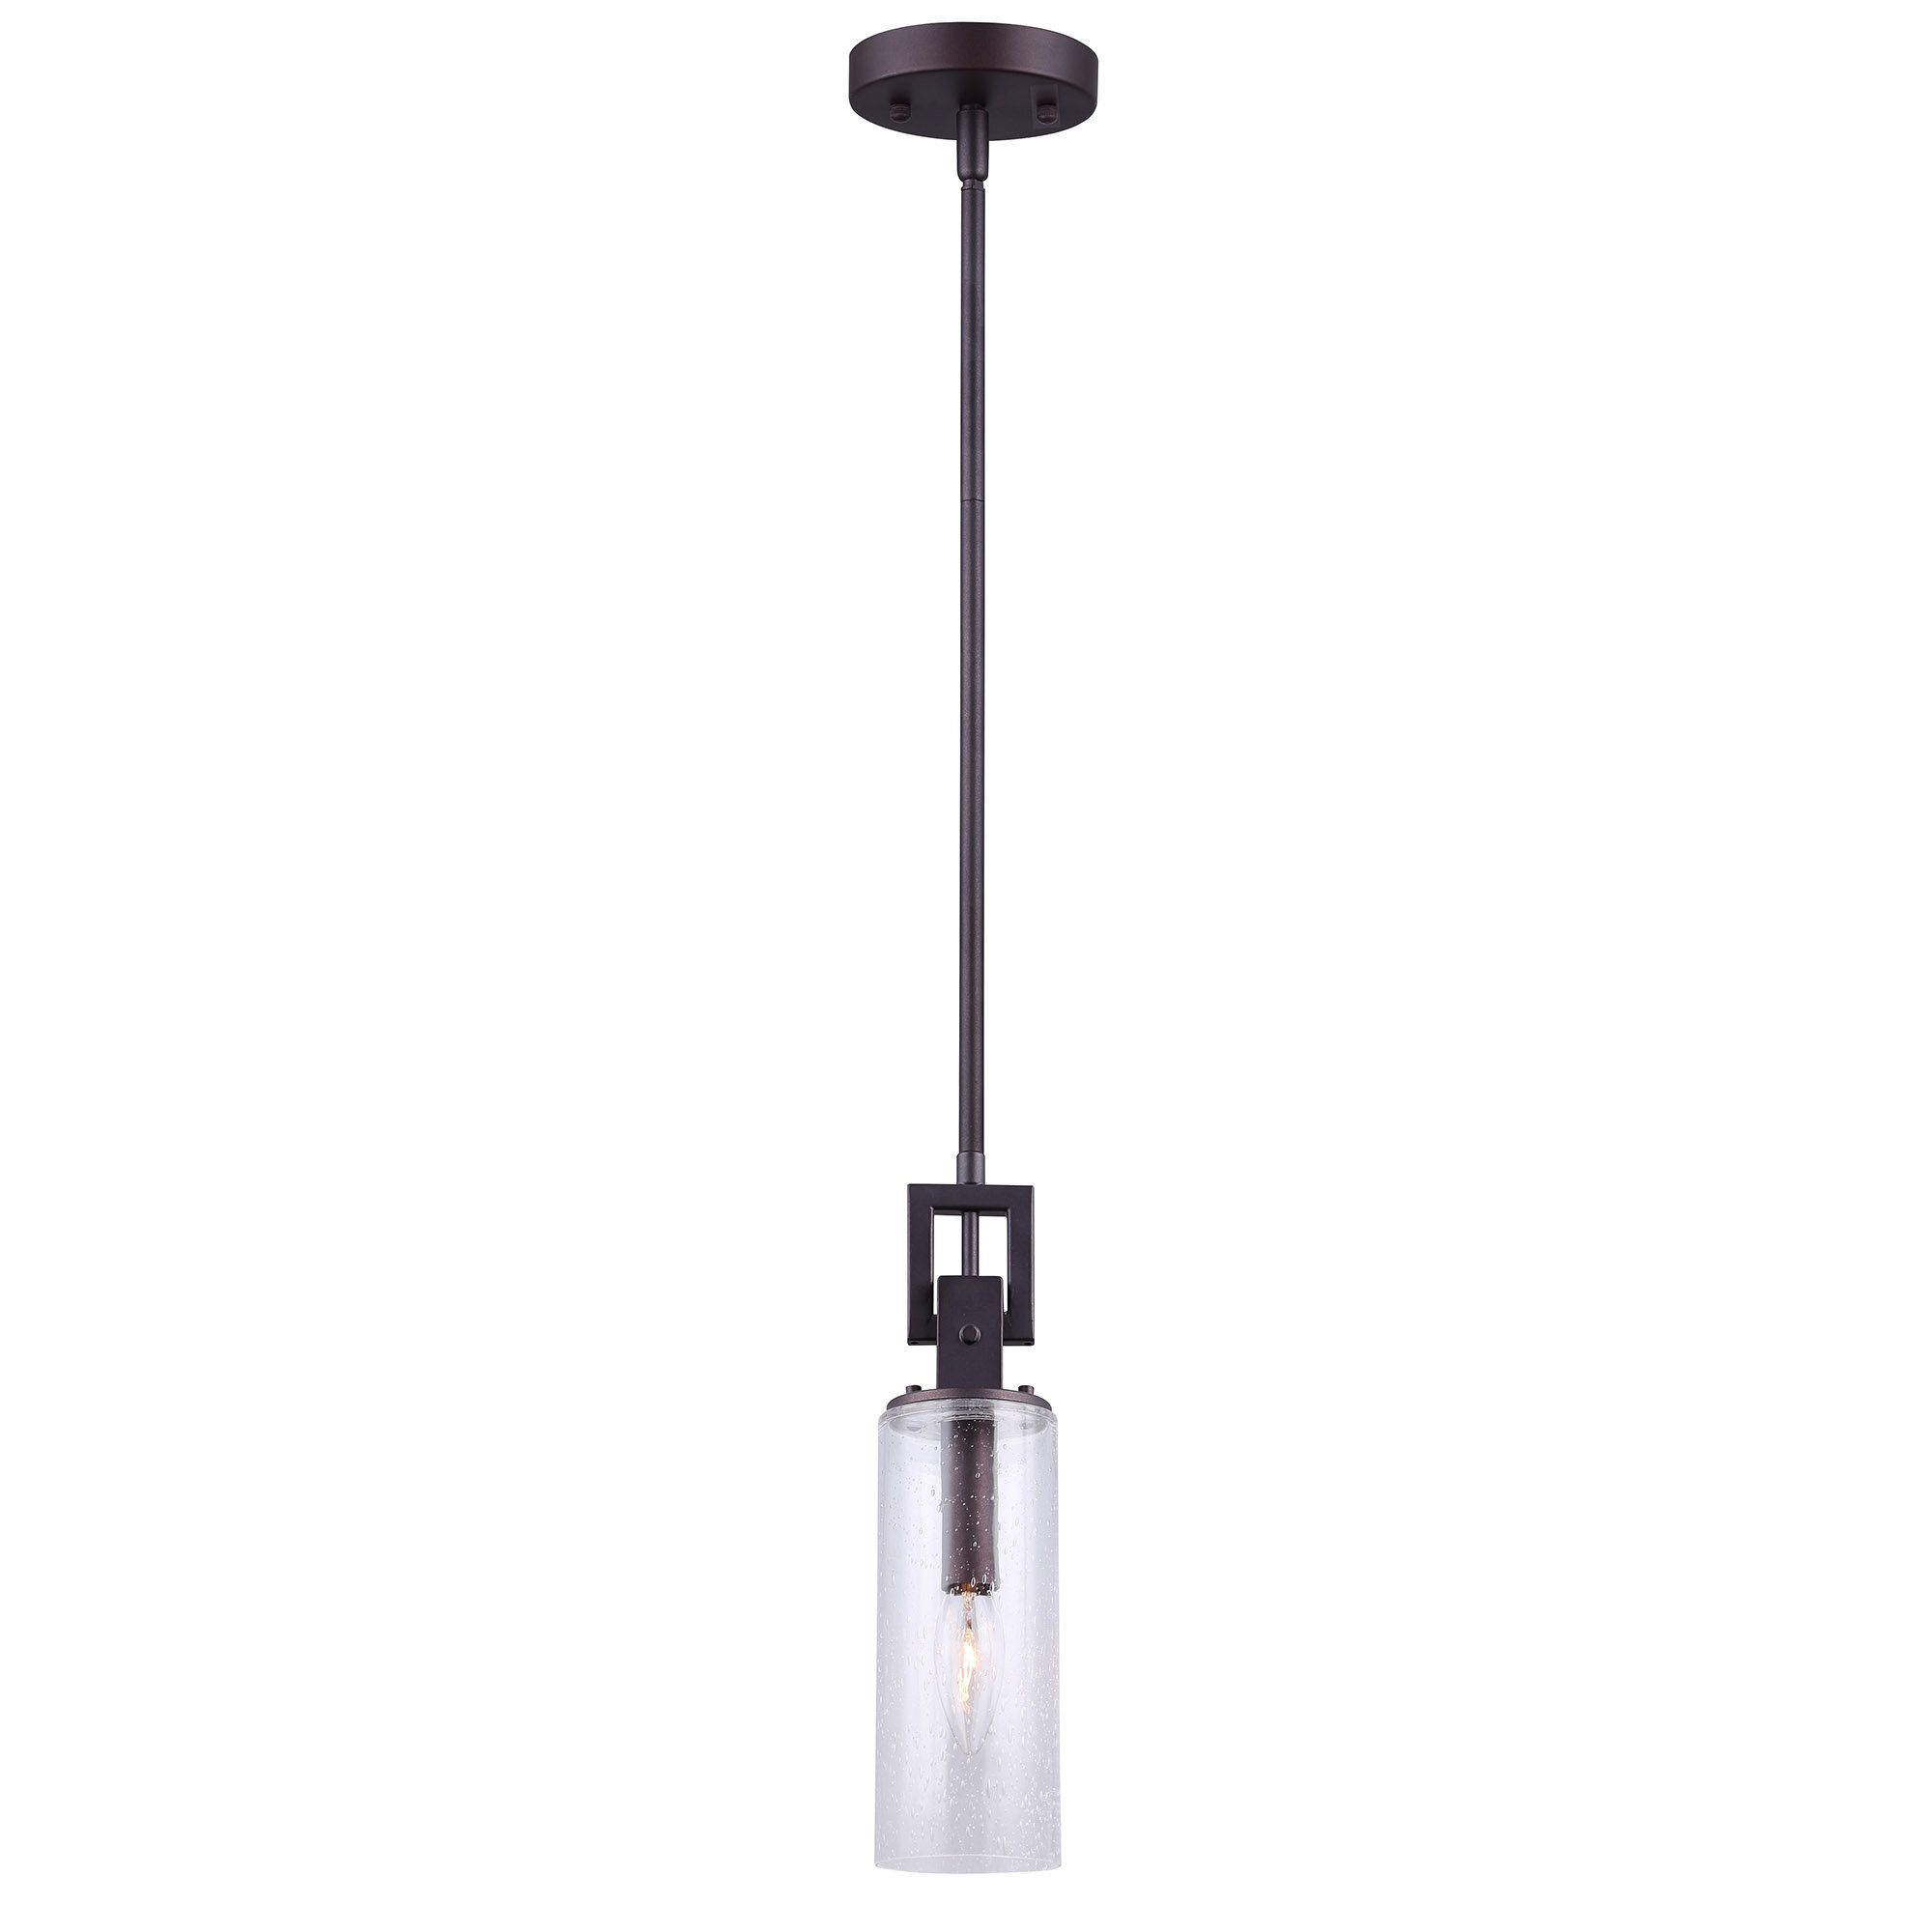 Mccary 1 Light Single Cylinder Pendant For Angelina 1 Light Single Cylinder Pendants (View 9 of 30)